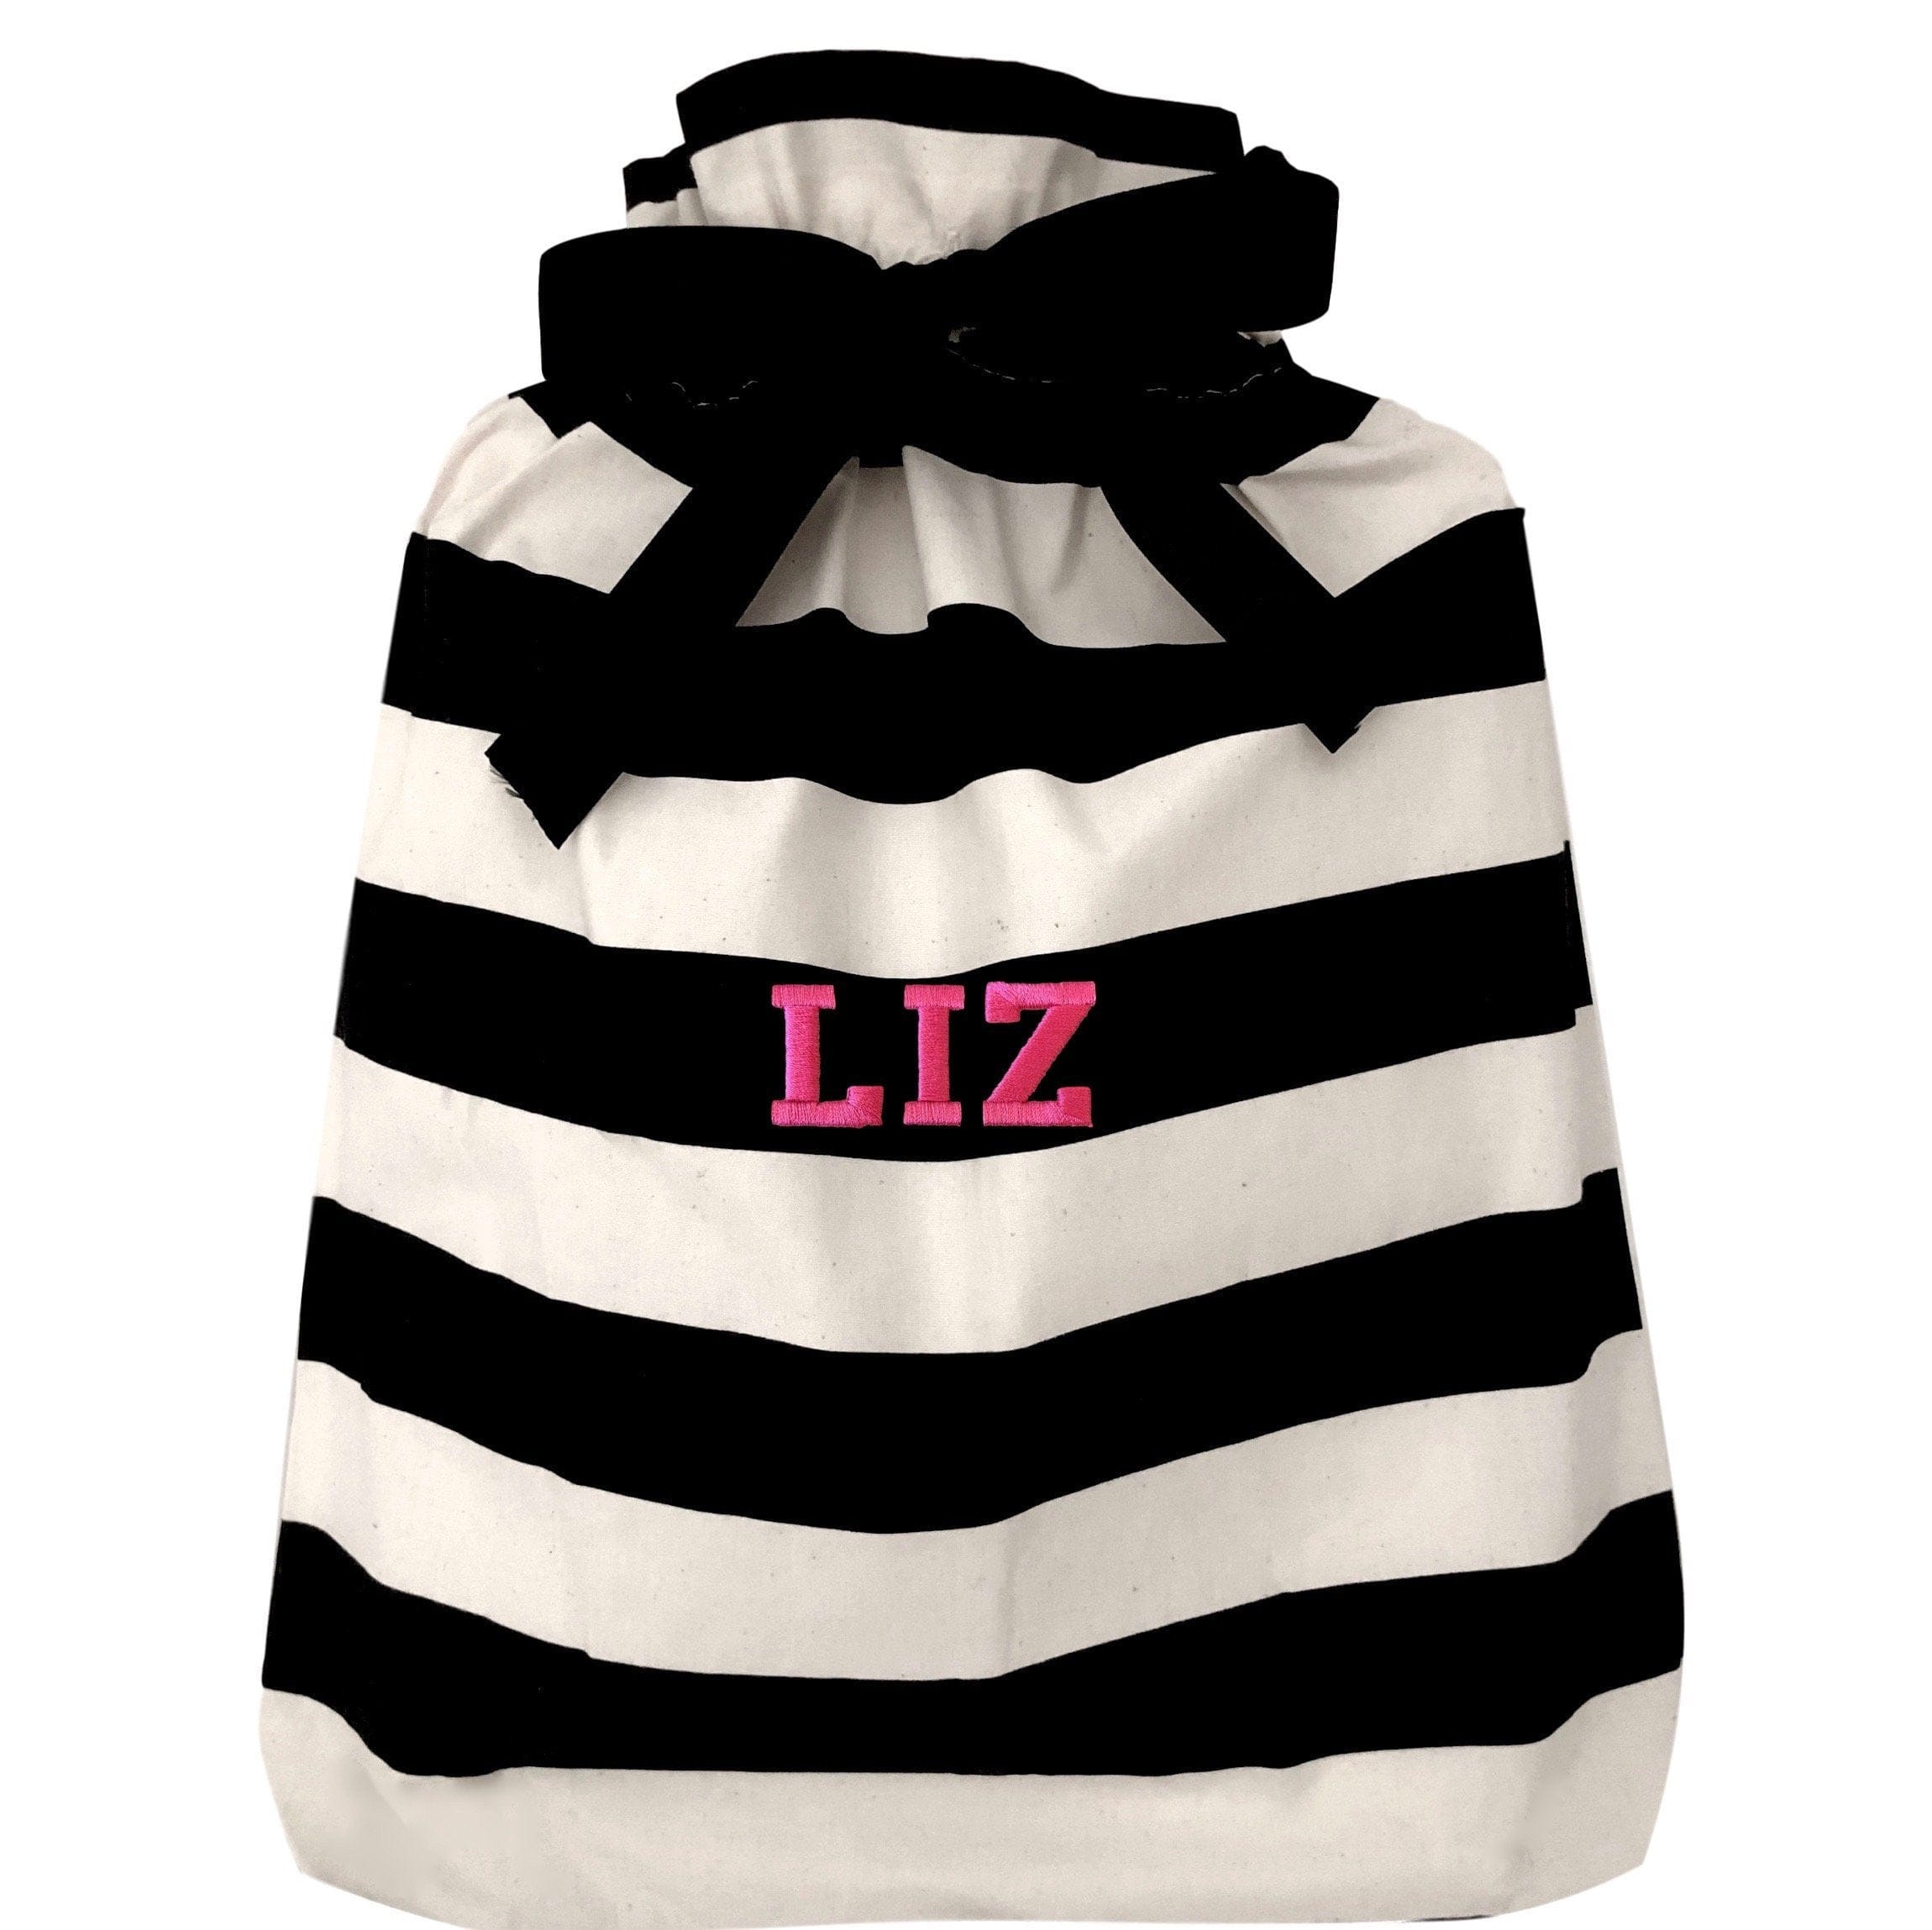 A large reusable gift bag with black and white horizontal stripes. 